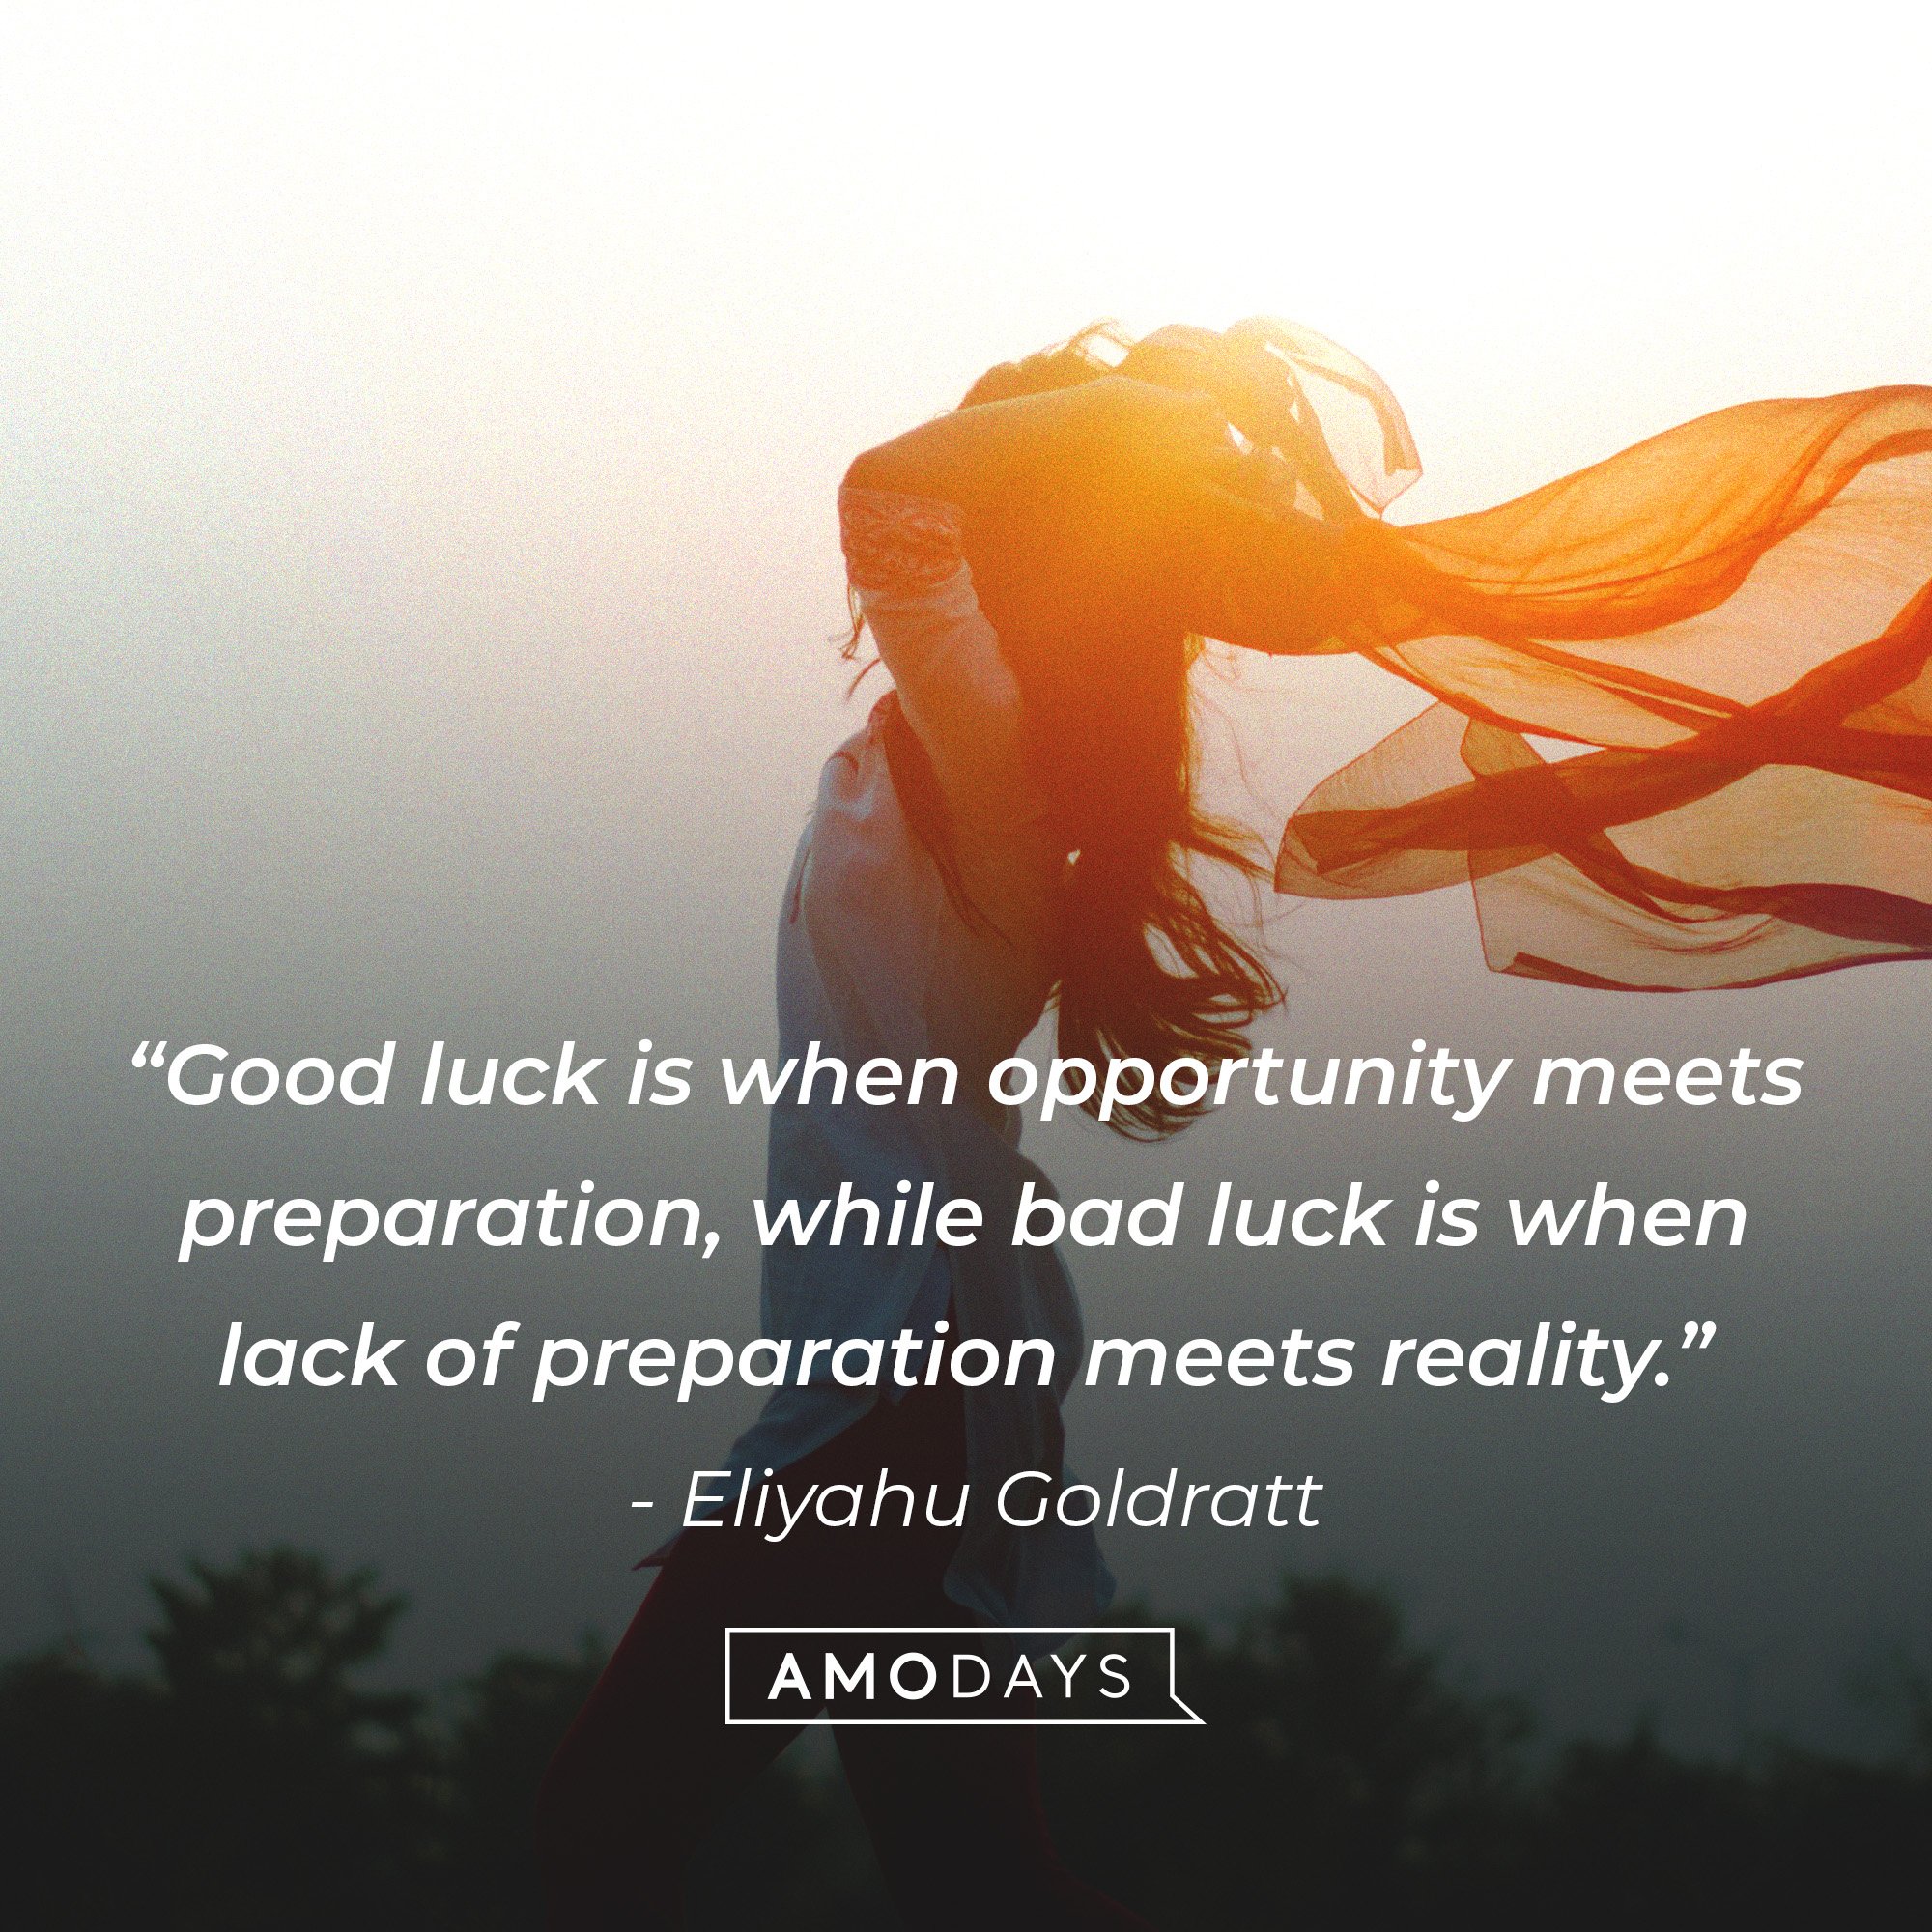 Eliyahu Goldratt's quote: “Good luck is when opportunity meets preparation, while bad luck is when lack of preparation meets reality.” | Image: AmoDays